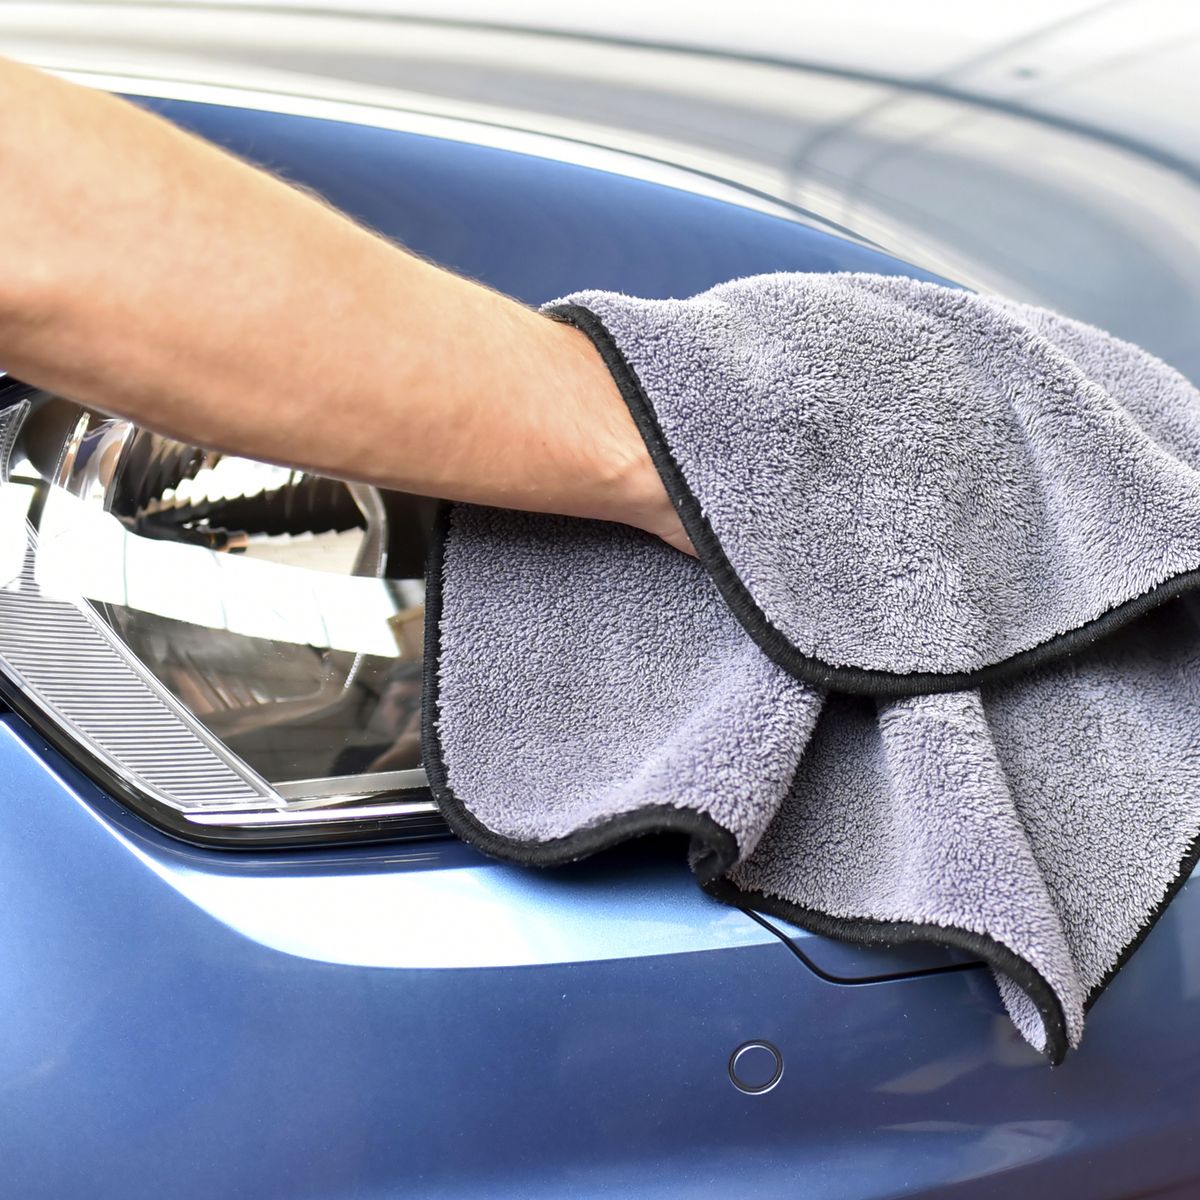 Car care tips: How to make your car shine in 4 easy steps.